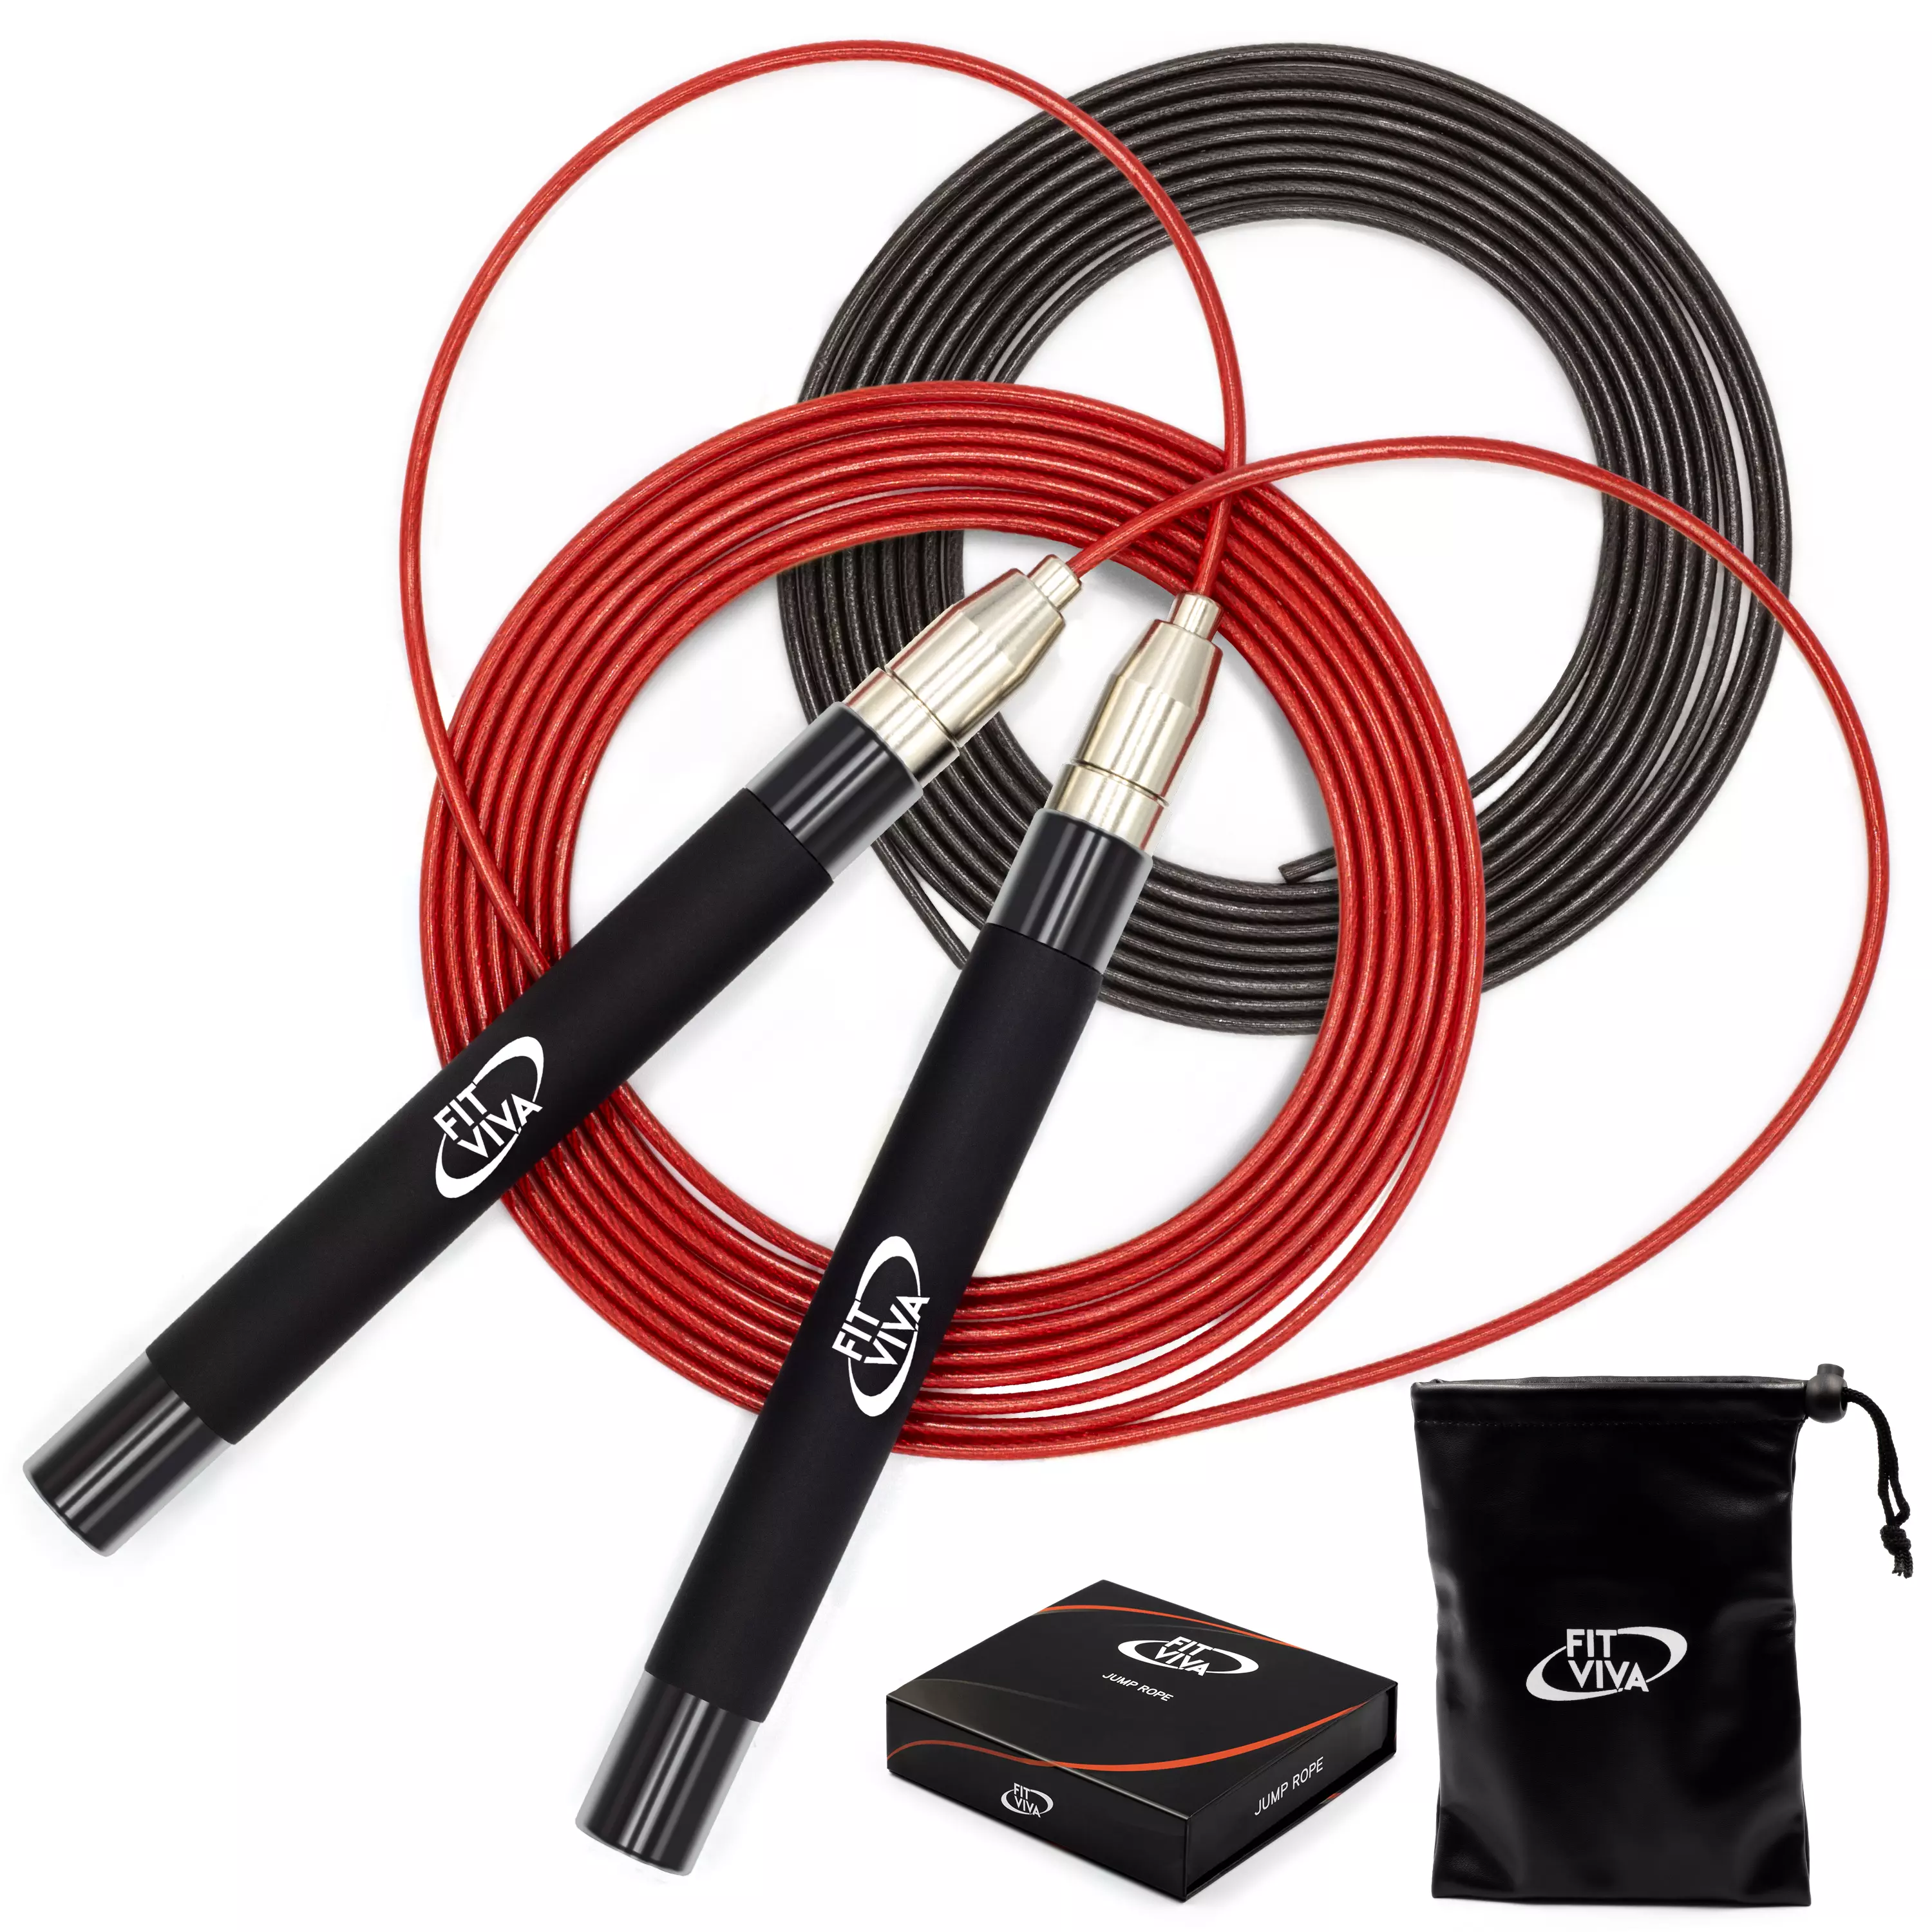 Deluxe High Speed Jump Rope - Skipping Rope for Fitness - Jump Ropes Adjustable Cables (2)